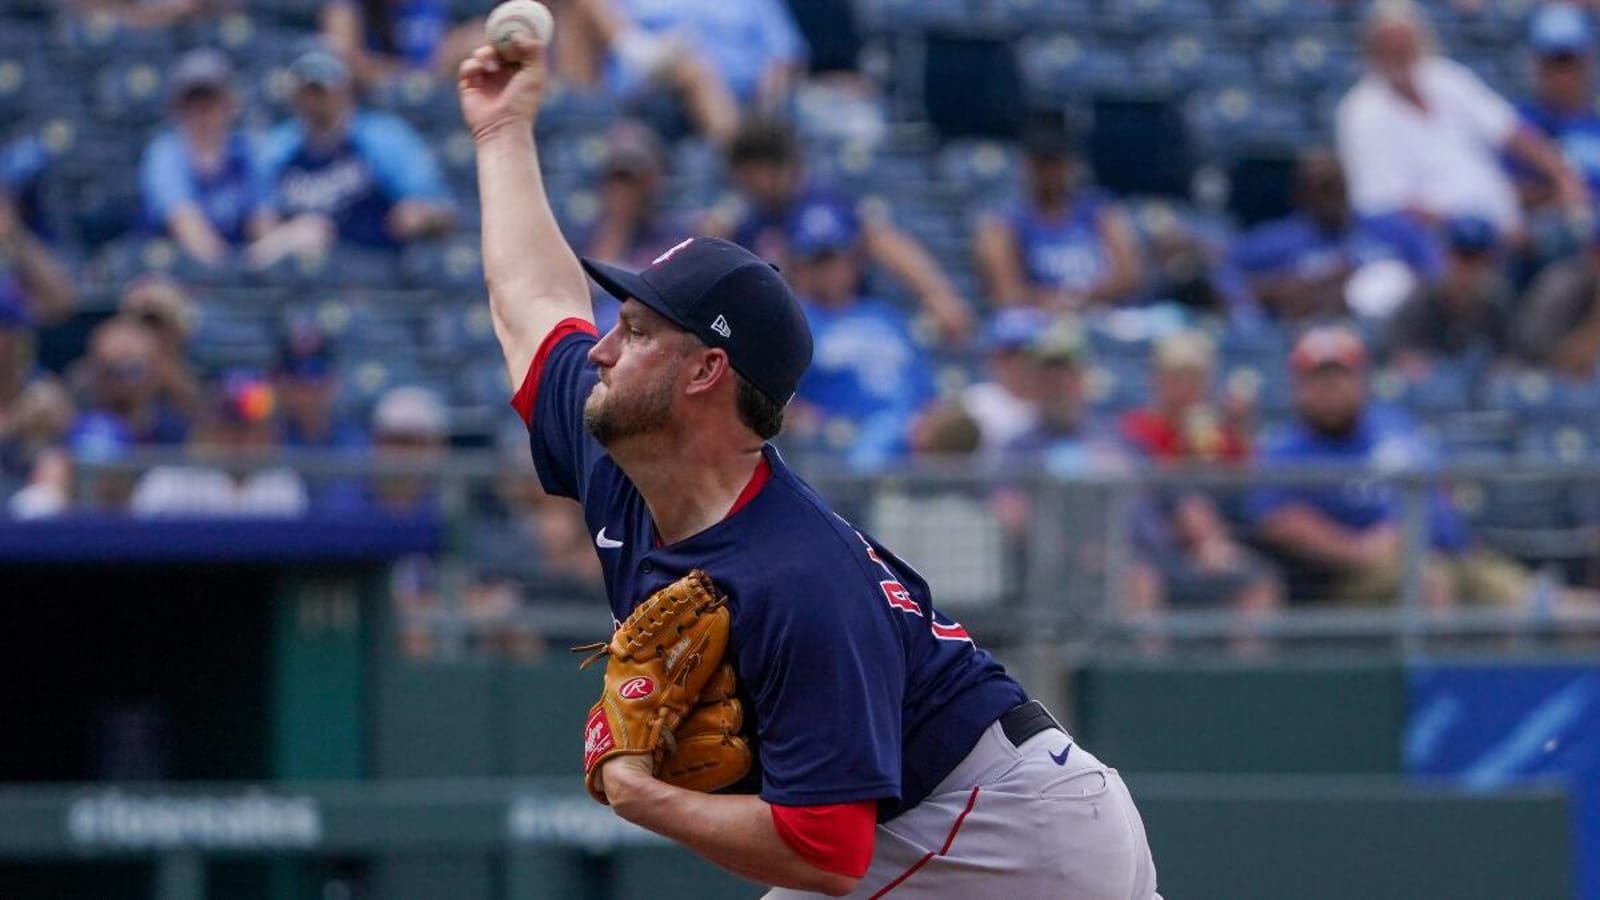 Marlins Taking Chance On Ex-Red Sox Hurler To Bolster Organizational Depth